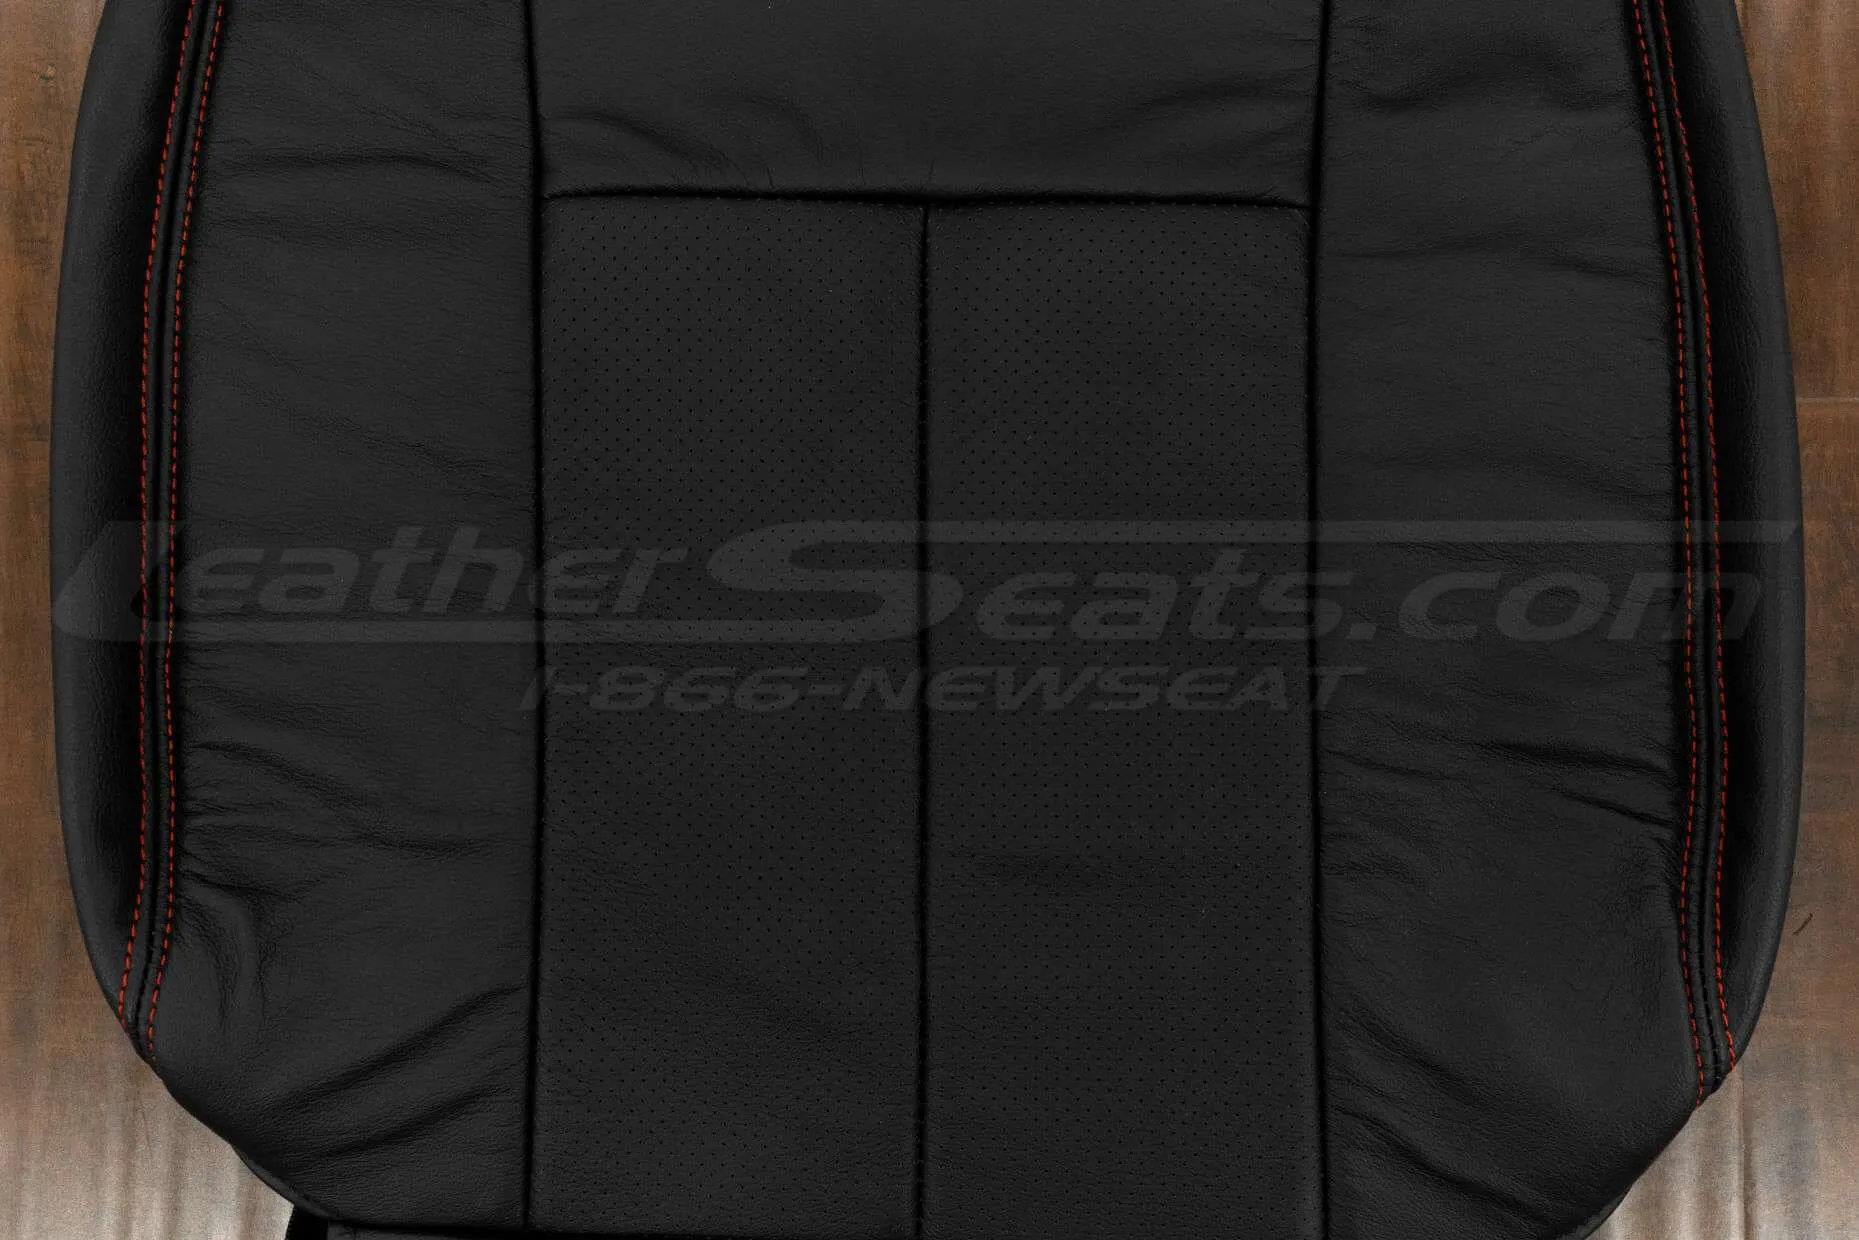 Perforated Combo section of backrest